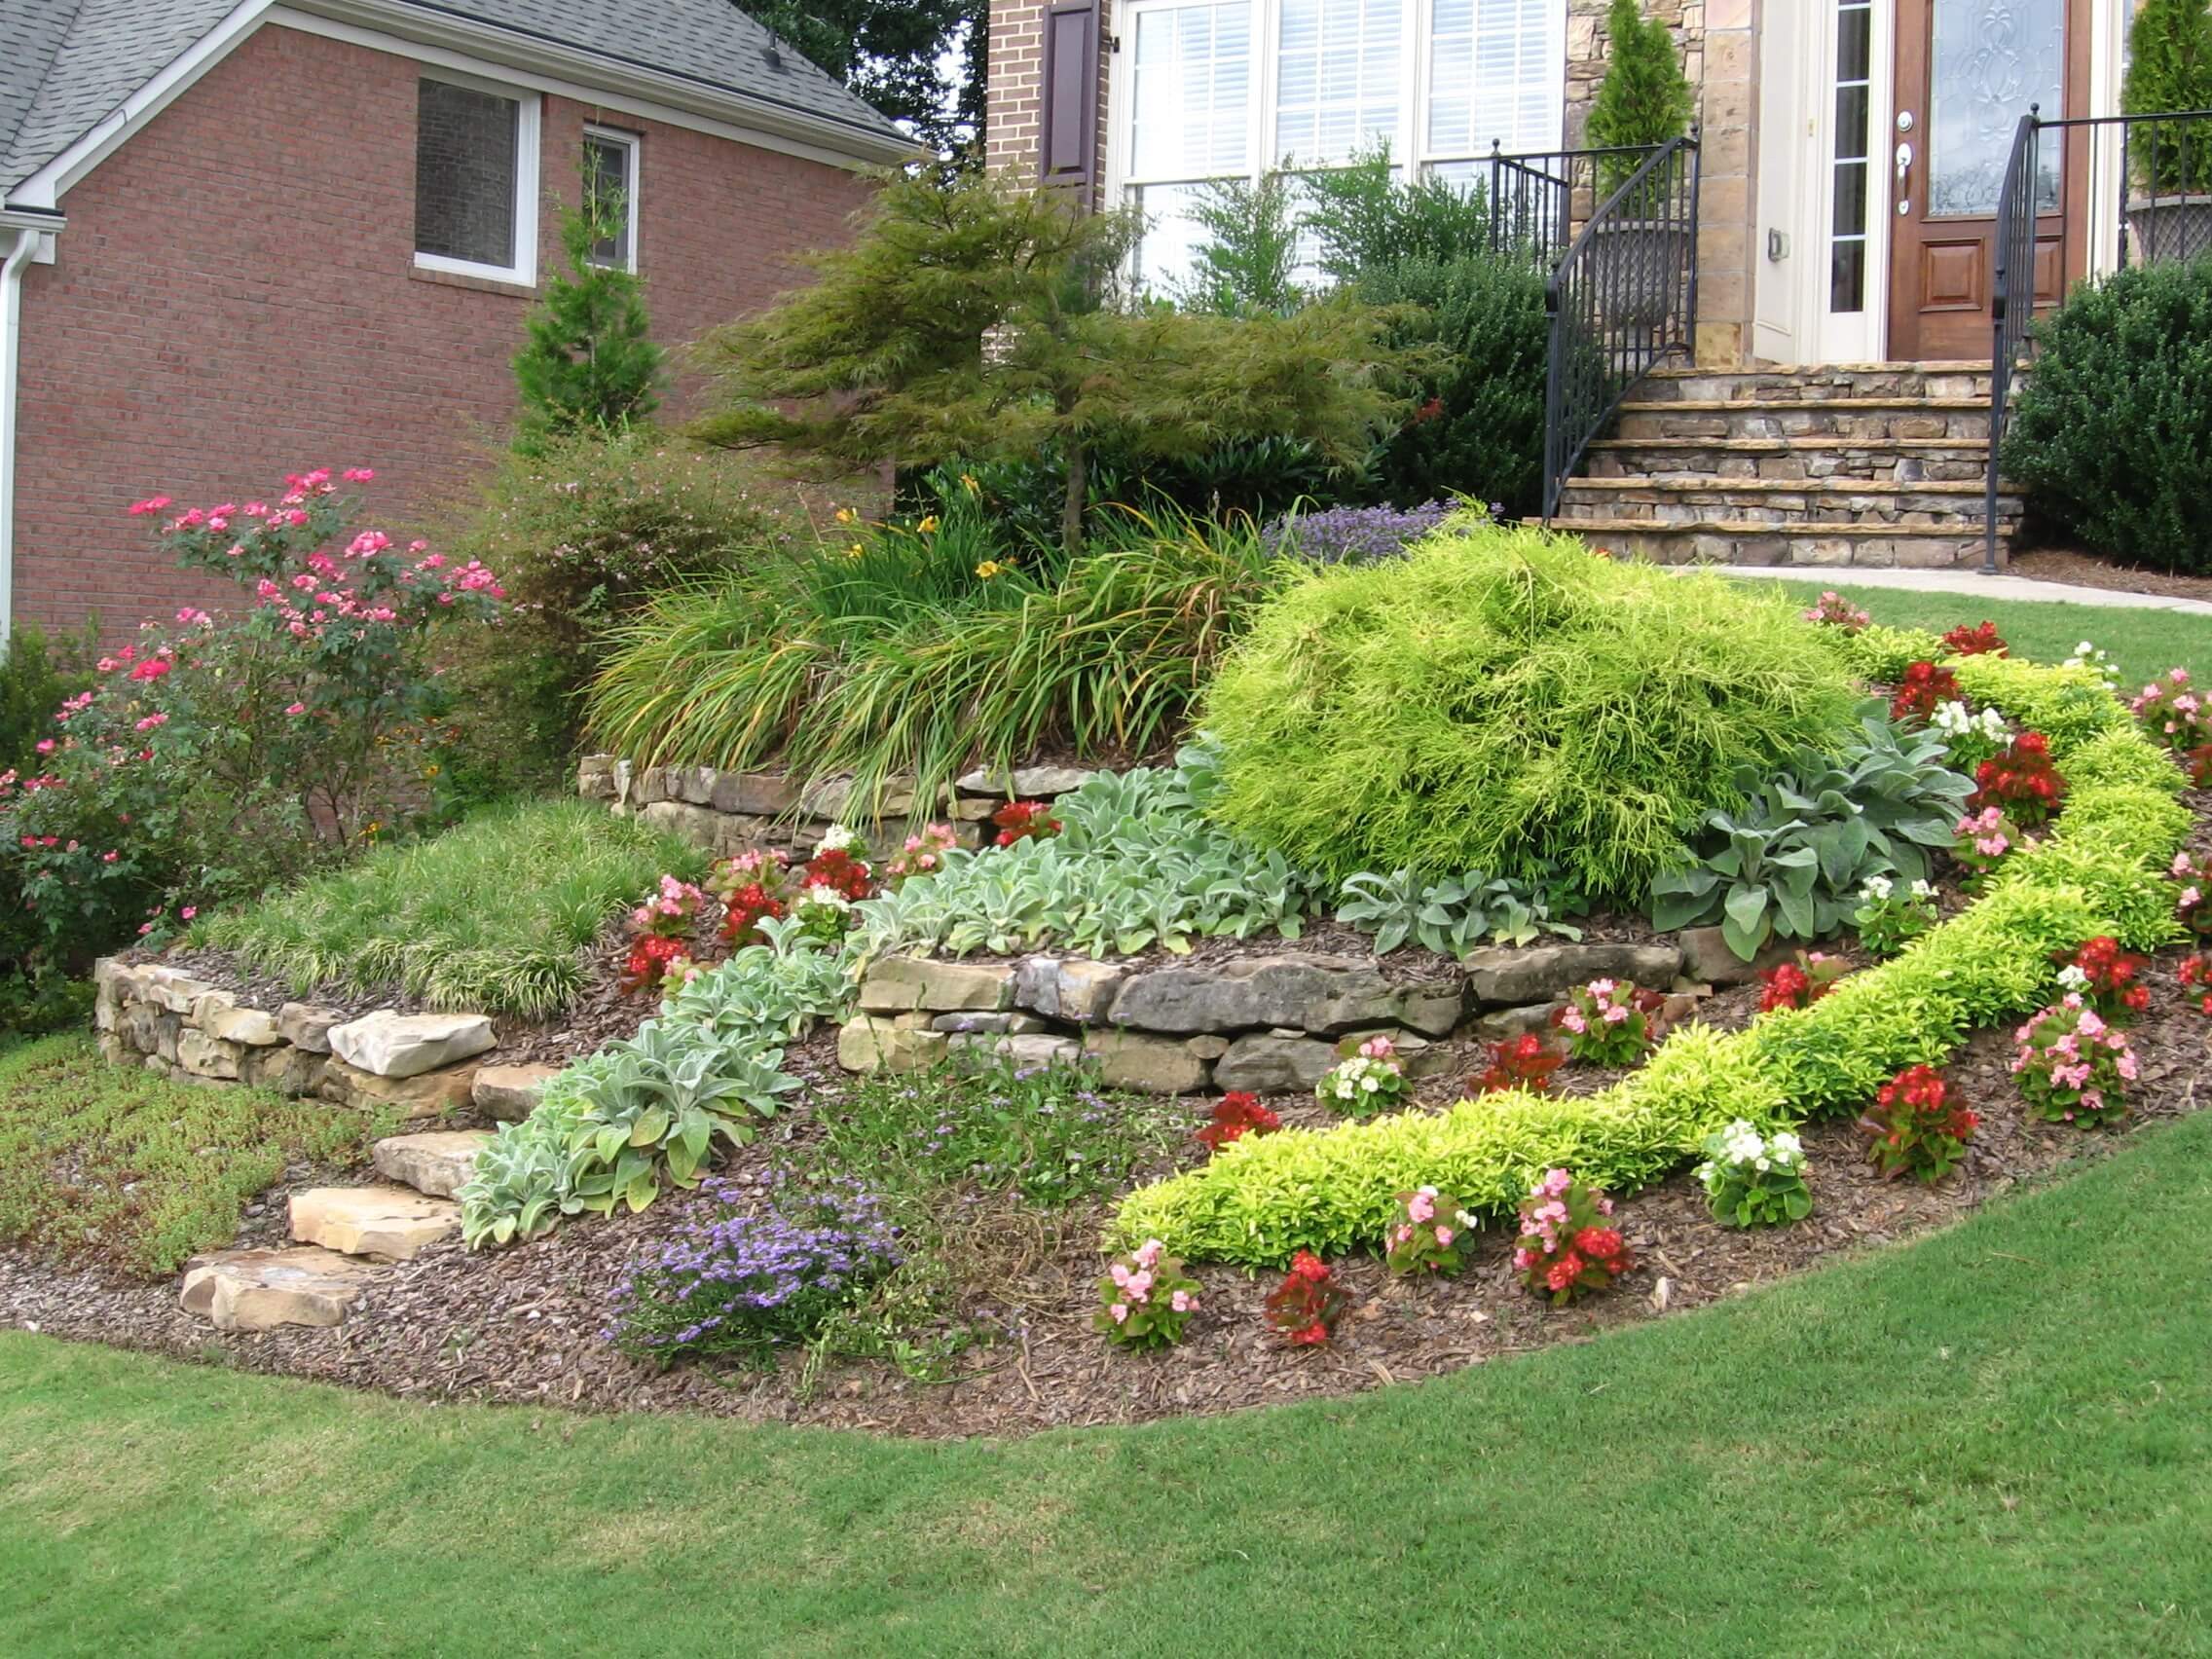 Residential Landscape Design
 Make Your Yard the Most Beautiful on the Block